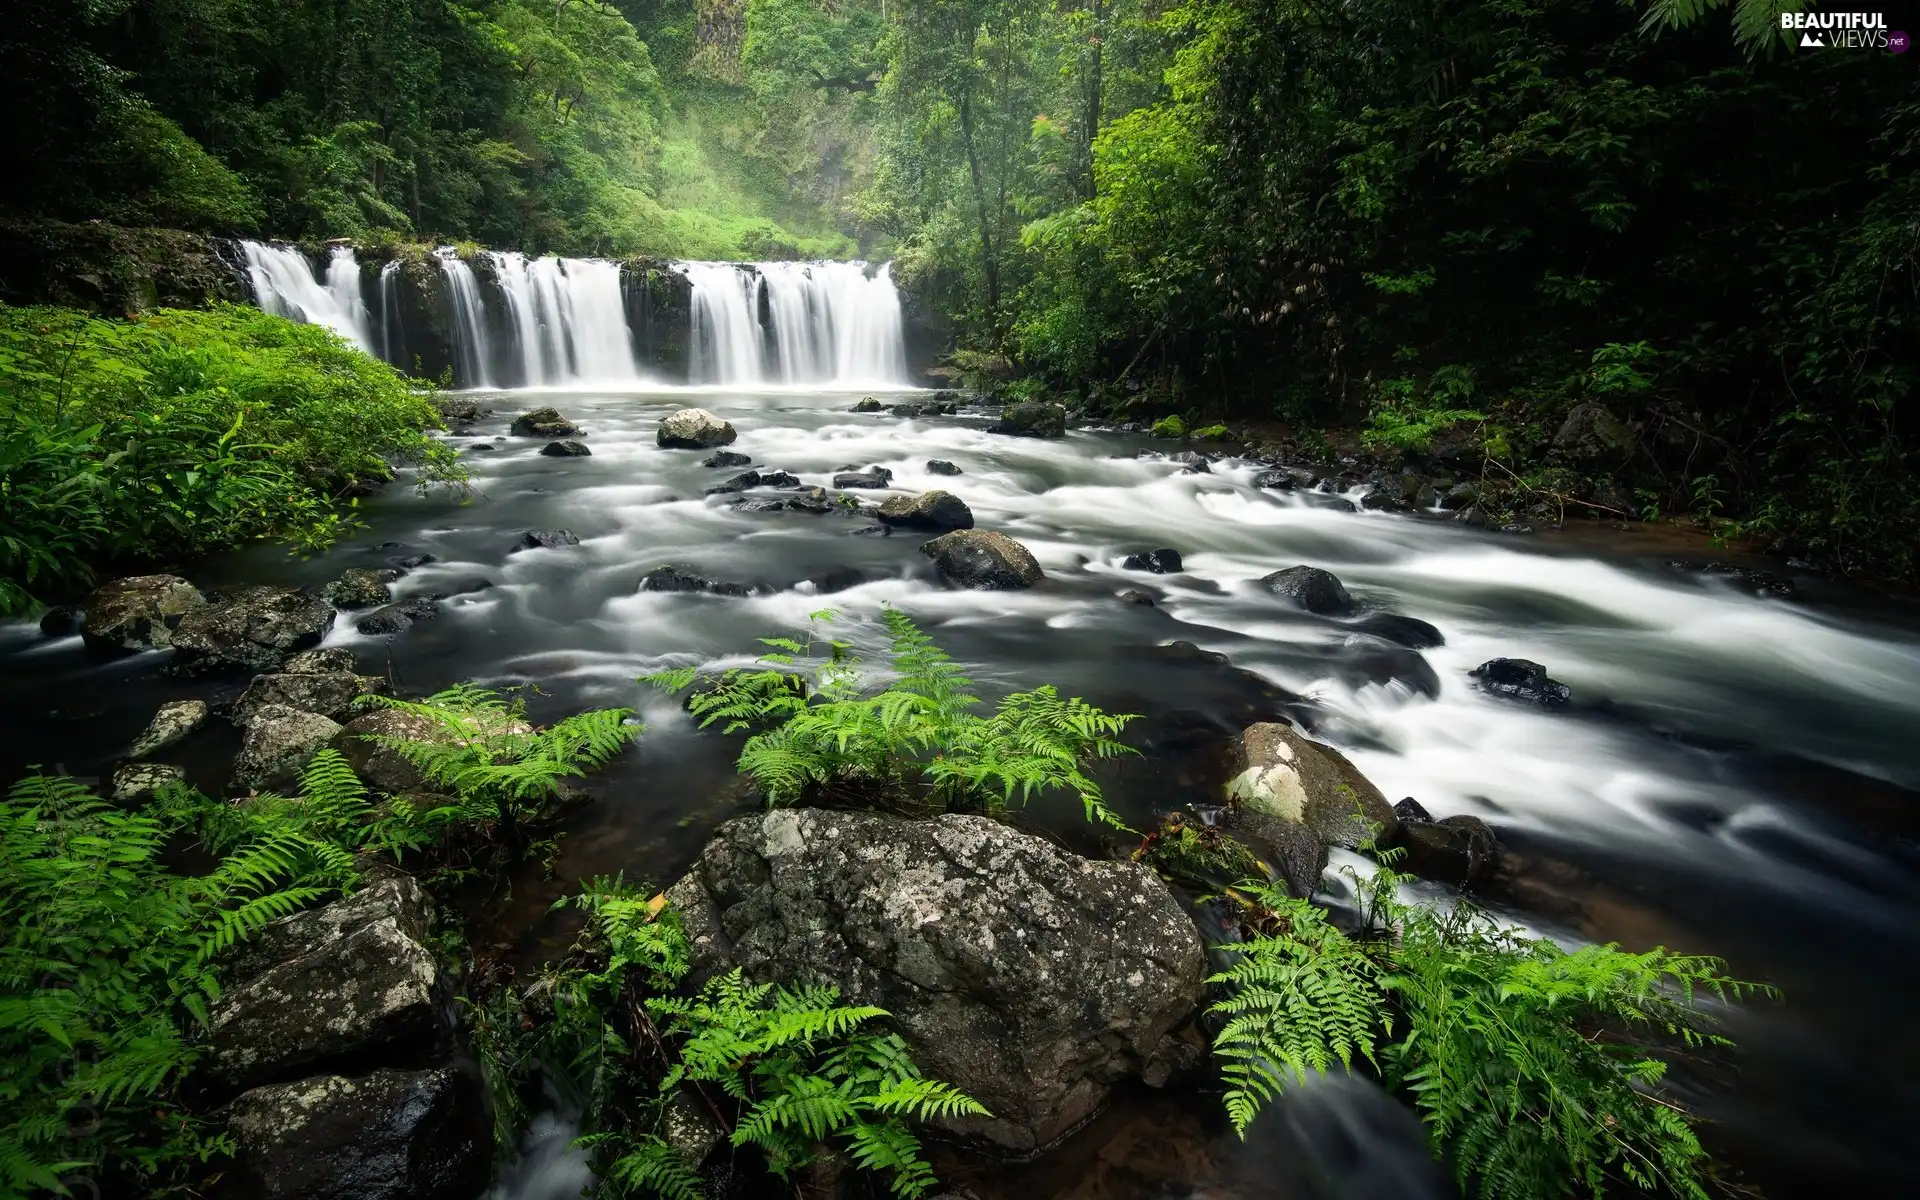 viewes, forest, Stones, trees, River, waterfall, fern